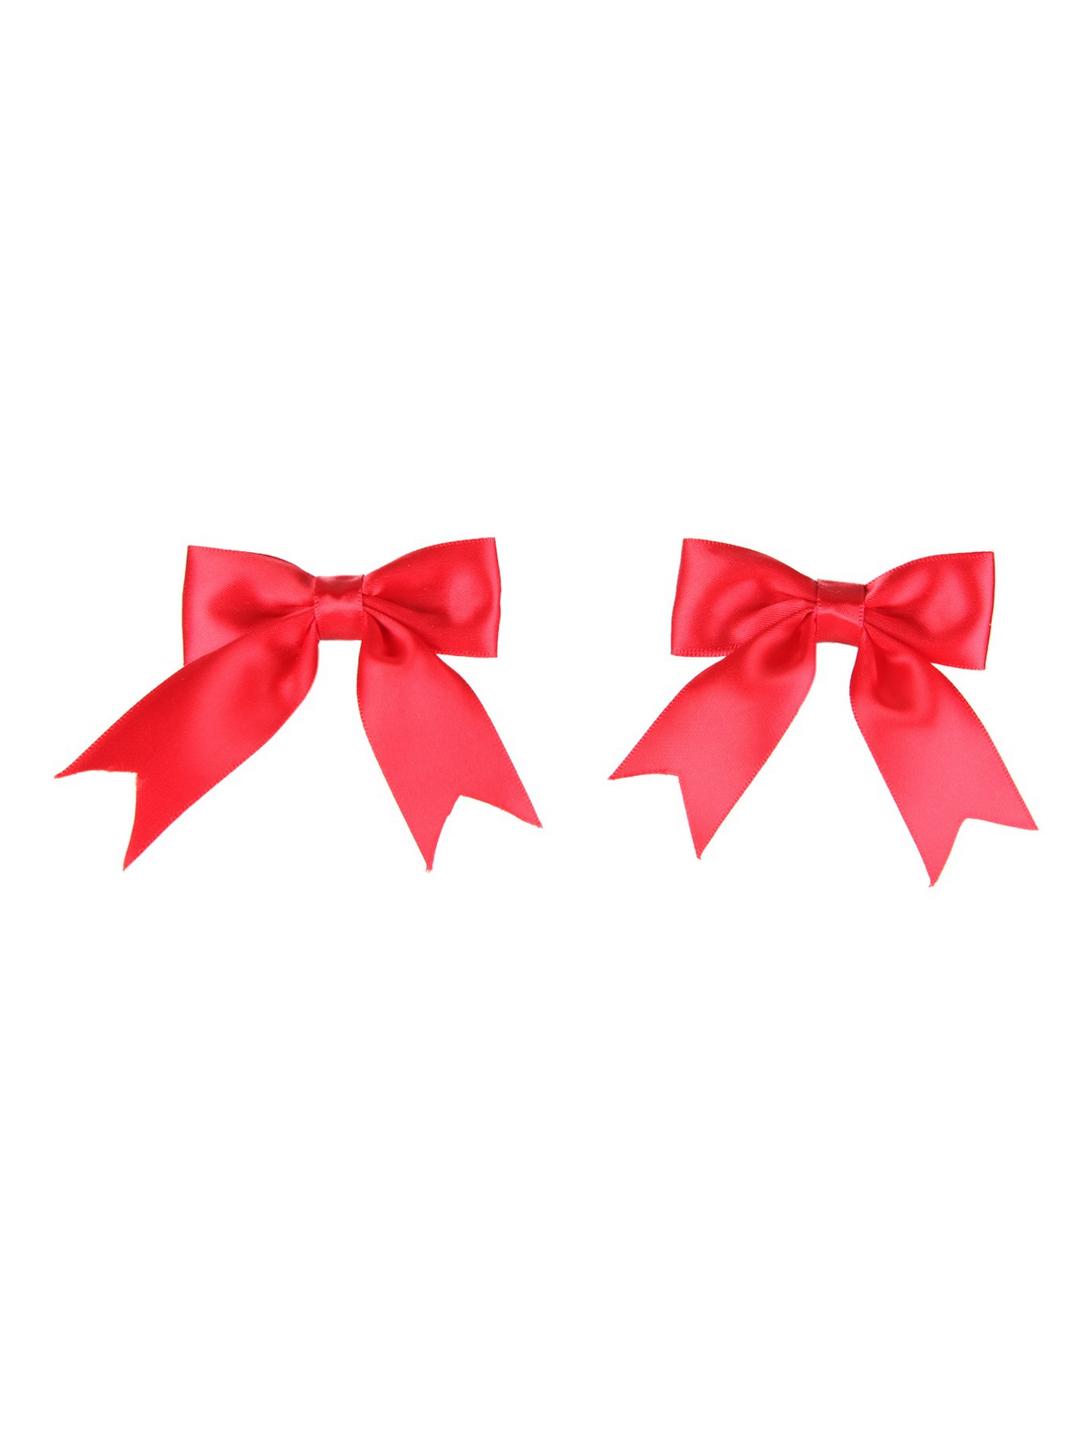 Red Satin Hair Bow 2 Pack, , hi-res